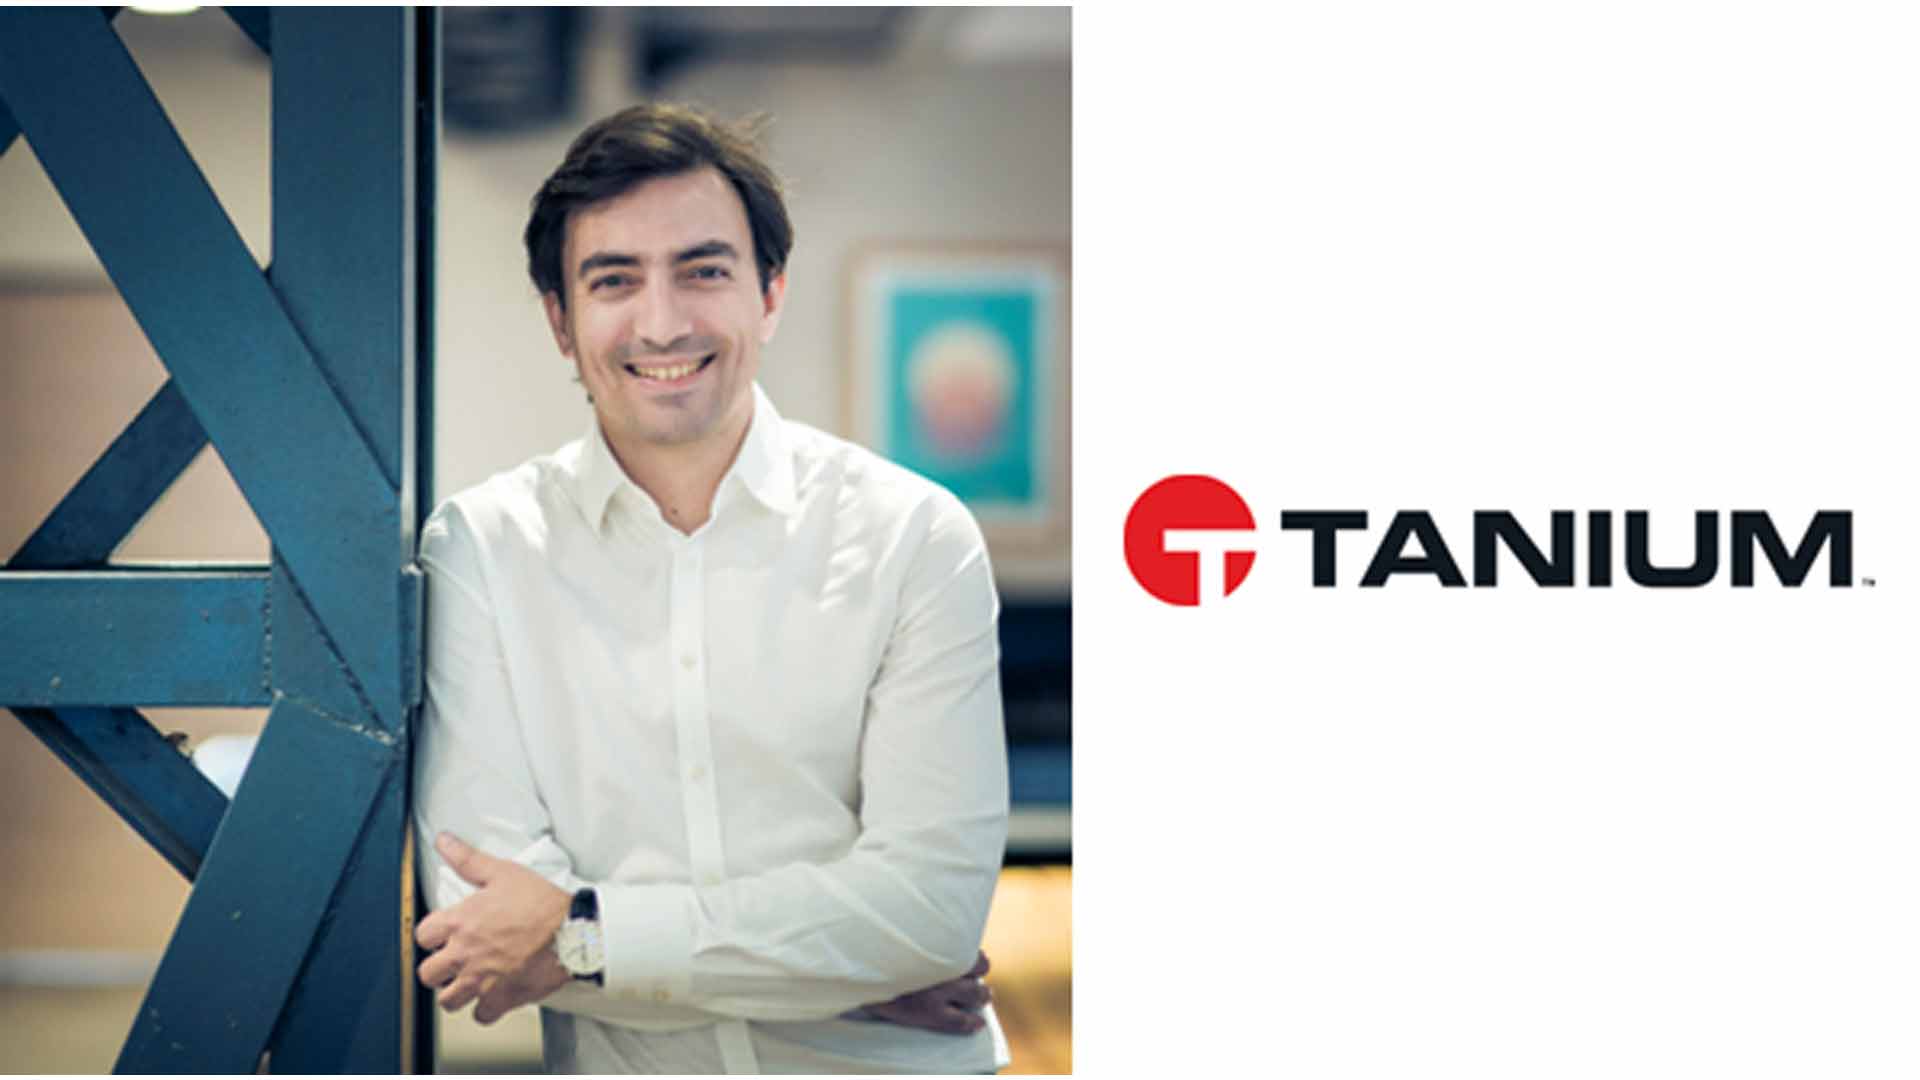 Tanium, one of the world's most valued cybersecurity nuggets, is coming to Paris!